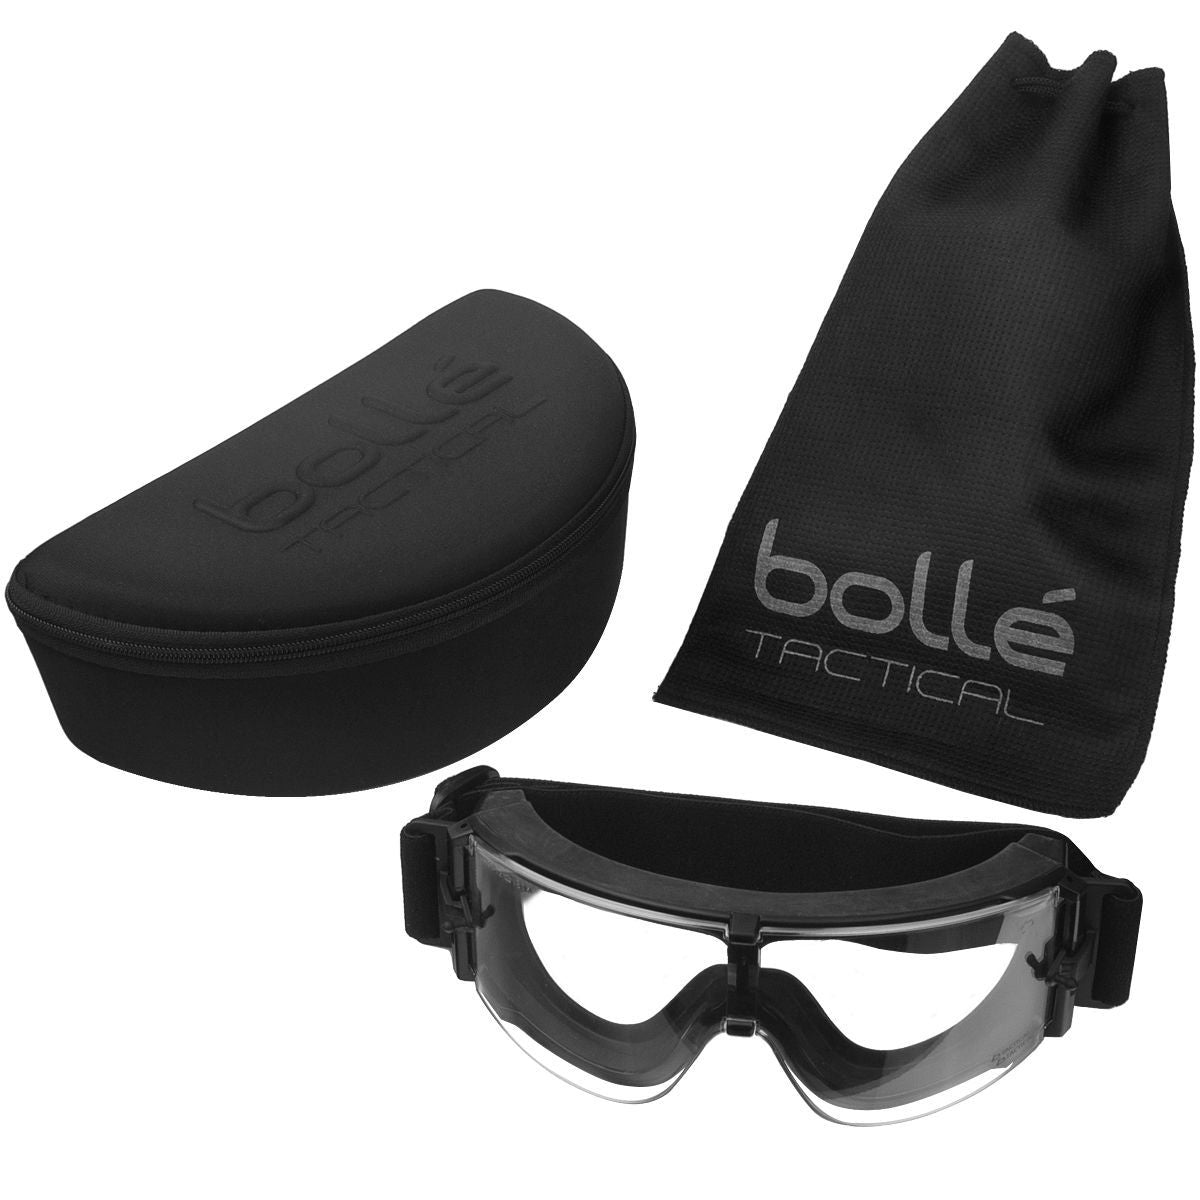 Bolle Tactical X800 Ballistic Goggles full pack